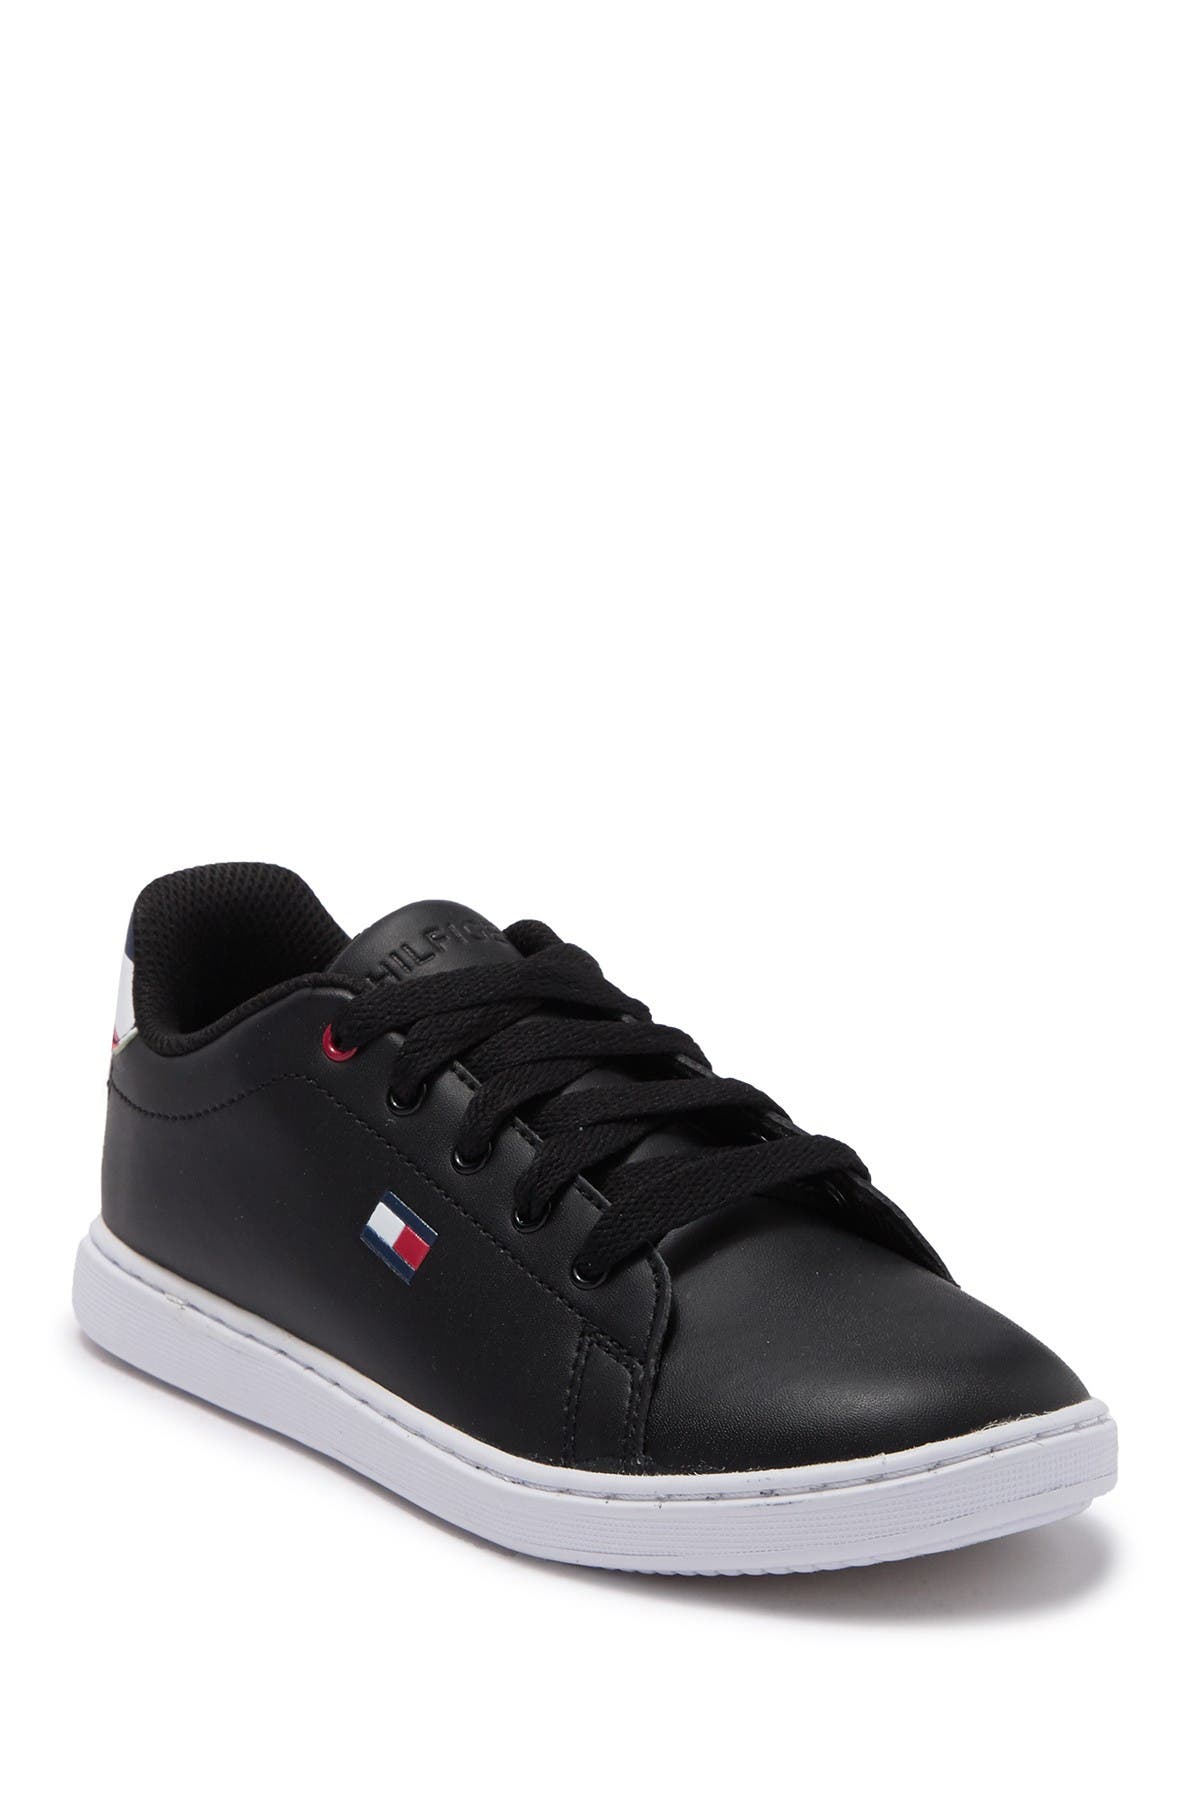 tommy hilfiger shoes iconic